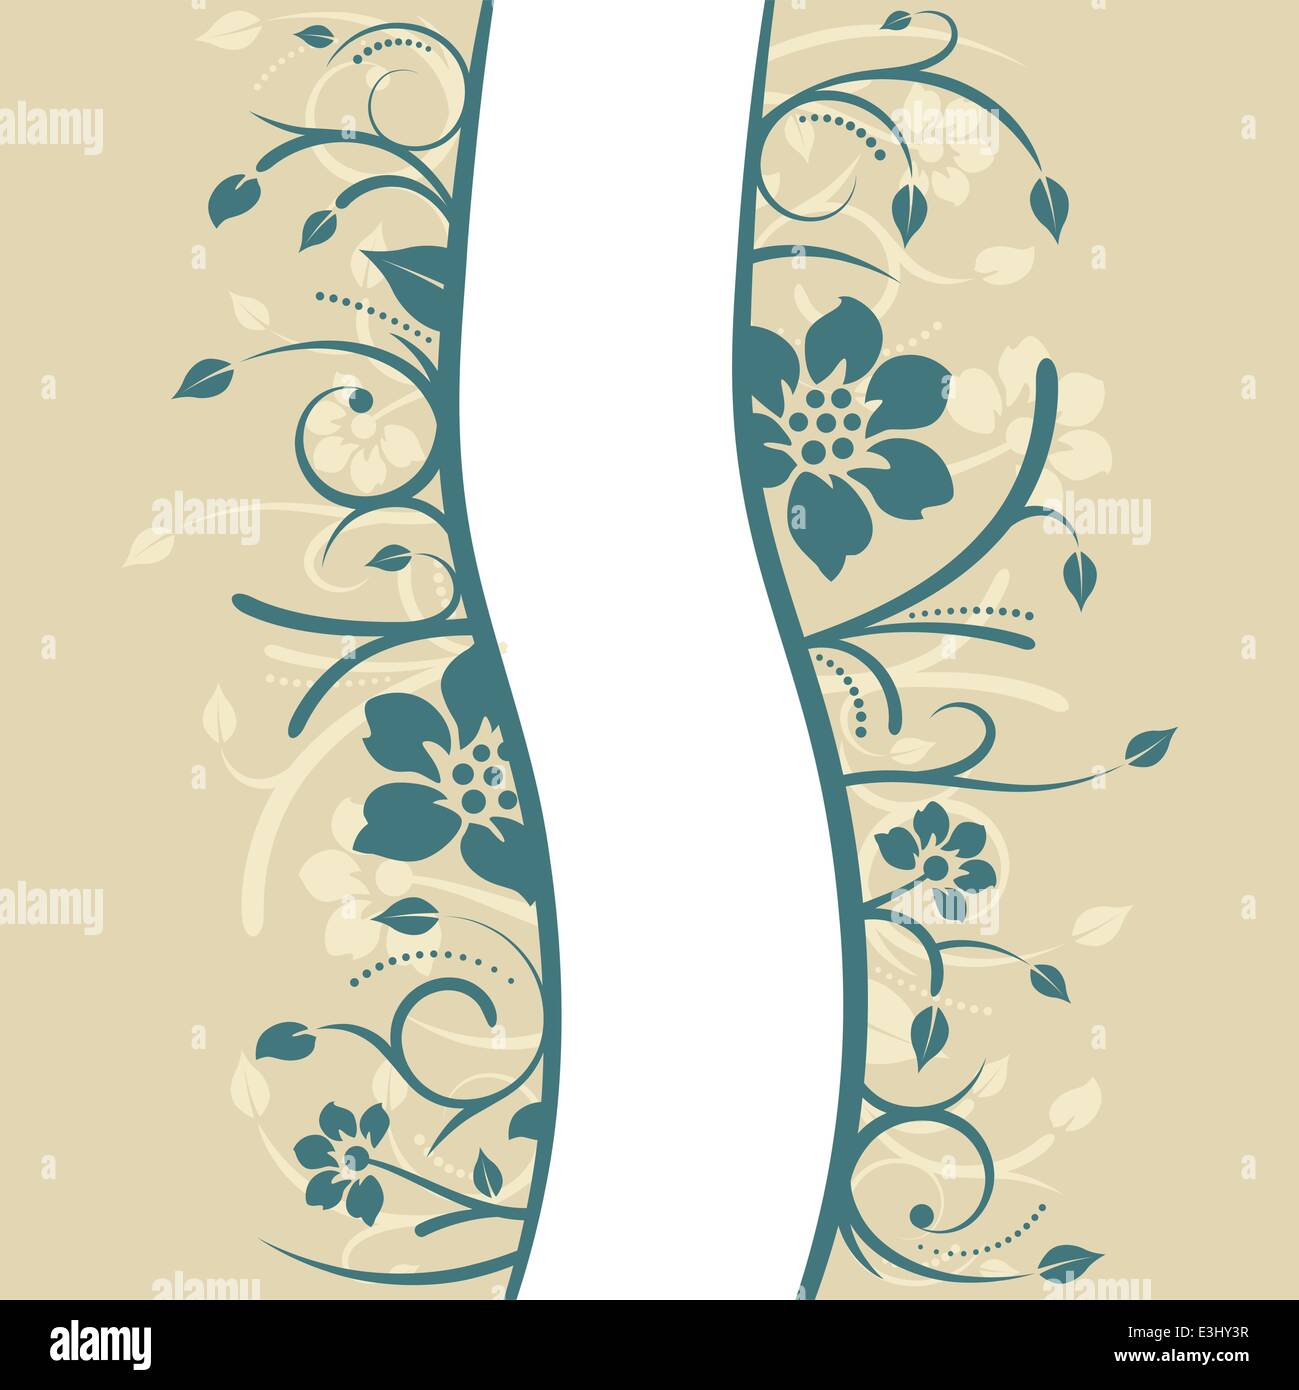 Curved floral background design in teal and beige colors Stock Vector